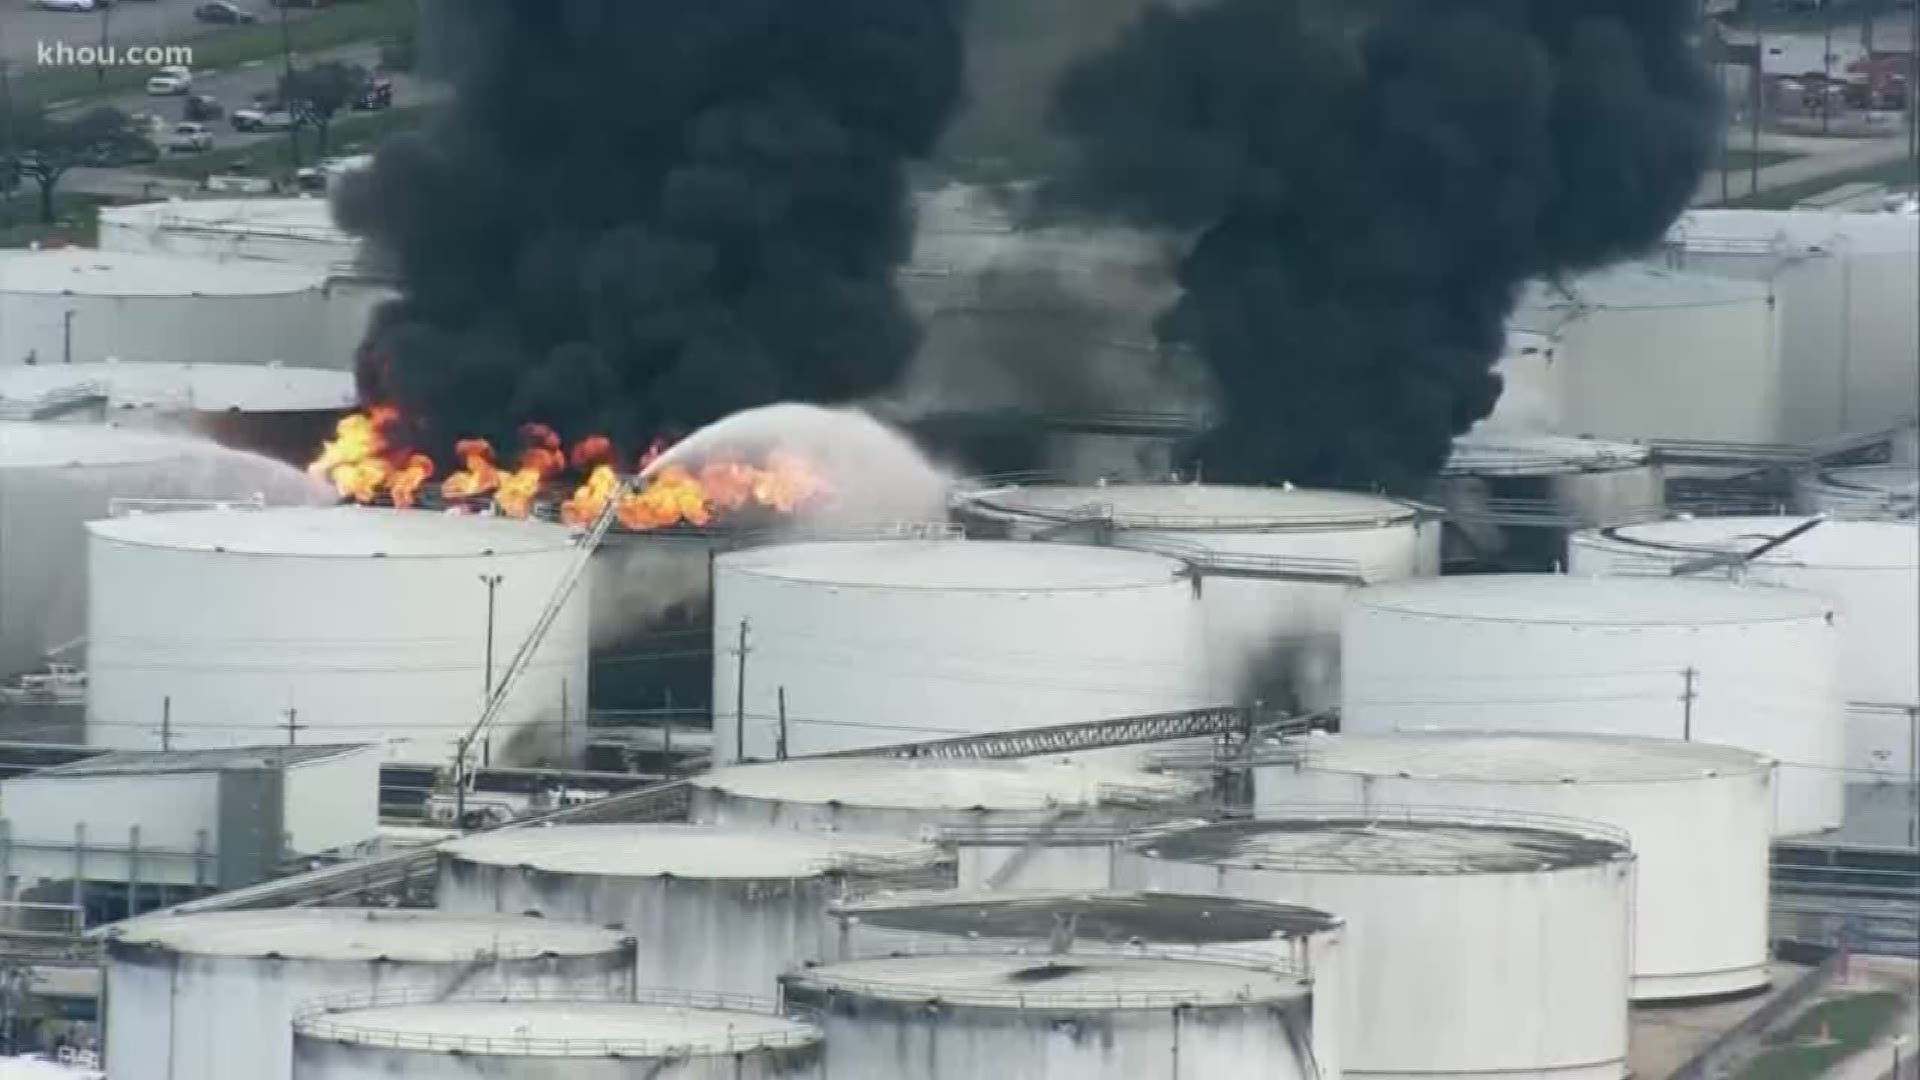 The cleanup at the ITC storage facility is far from over. Crews are working to empty the chemicals from the damaged tanks to another farm, but the process to do that is not easy and flare-ups are possible.